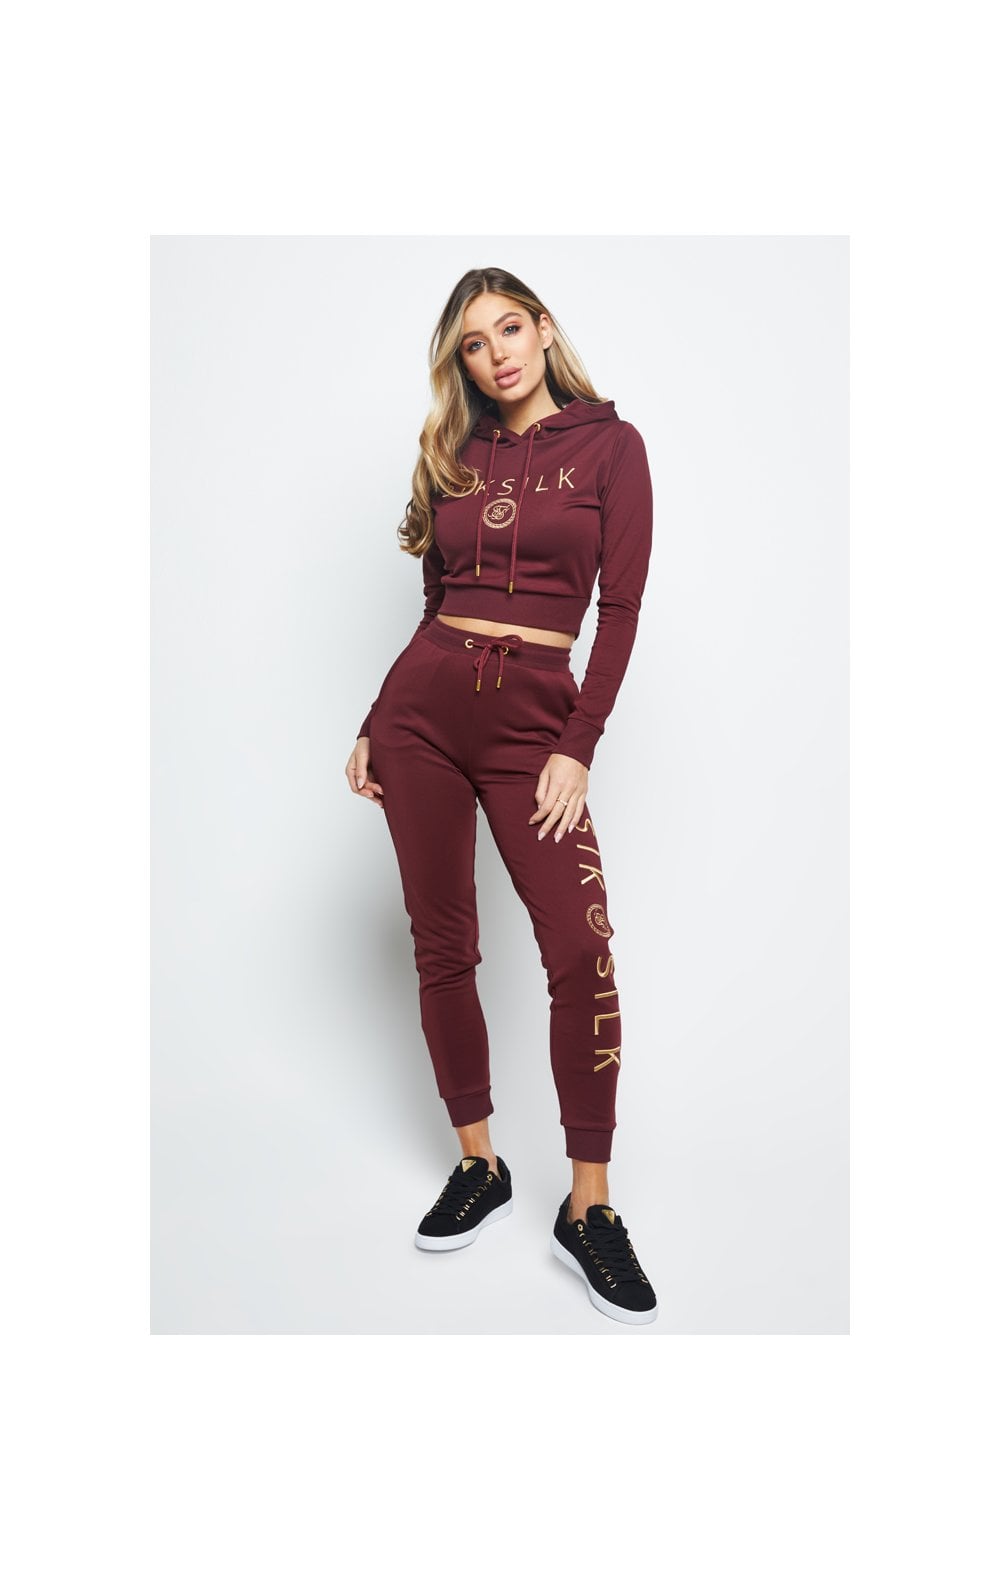 Load image into Gallery viewer, SikSilk Eyelet Mesh Track Top - Burgundy (1)